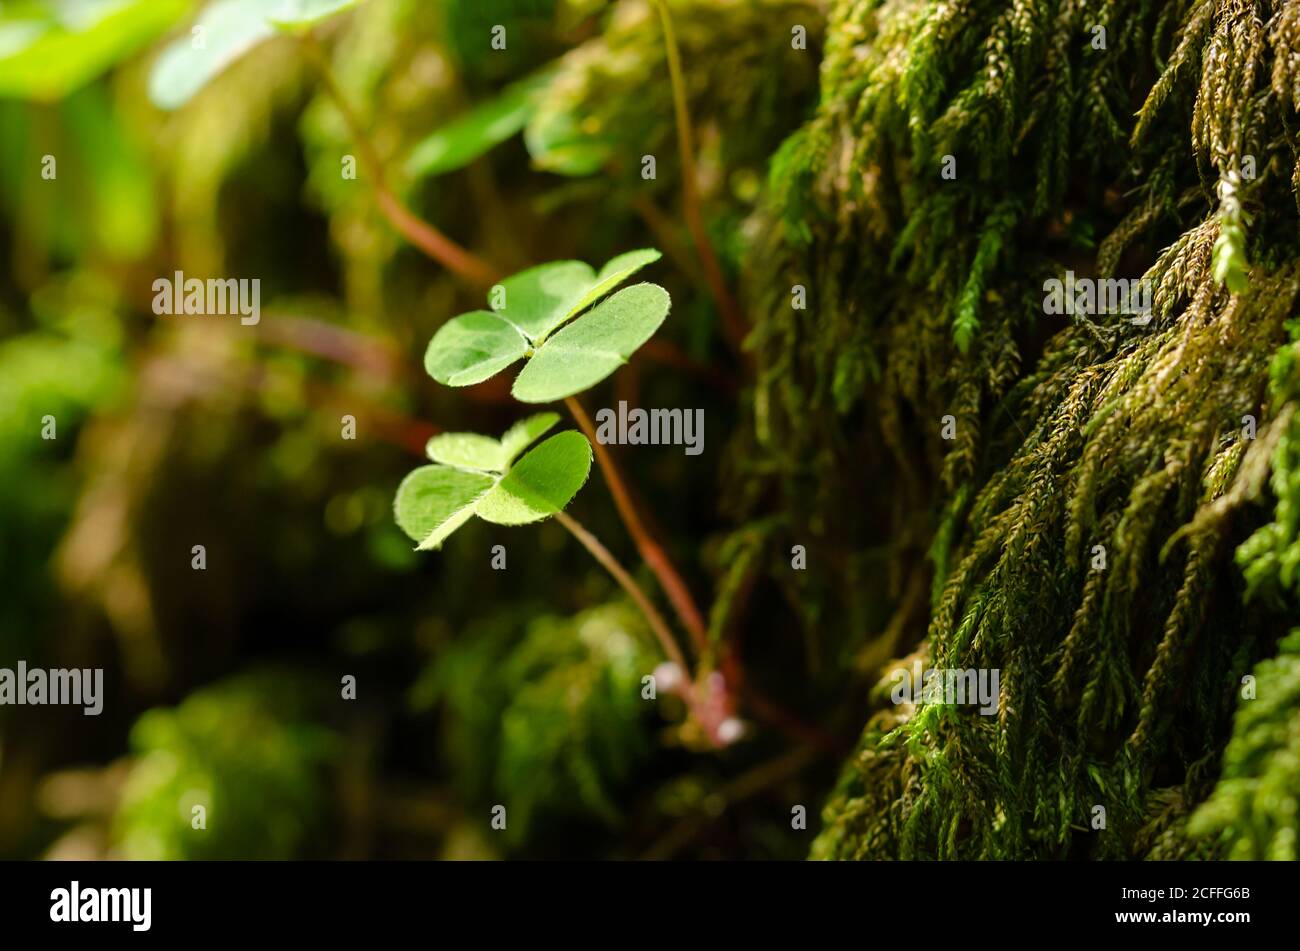 Wood sorrel, growing on a green mossy stone in the forest. Oxalis acetosella, common wood sorrel, is sometimes referred to shamrock, given as a gift. Stock Photo